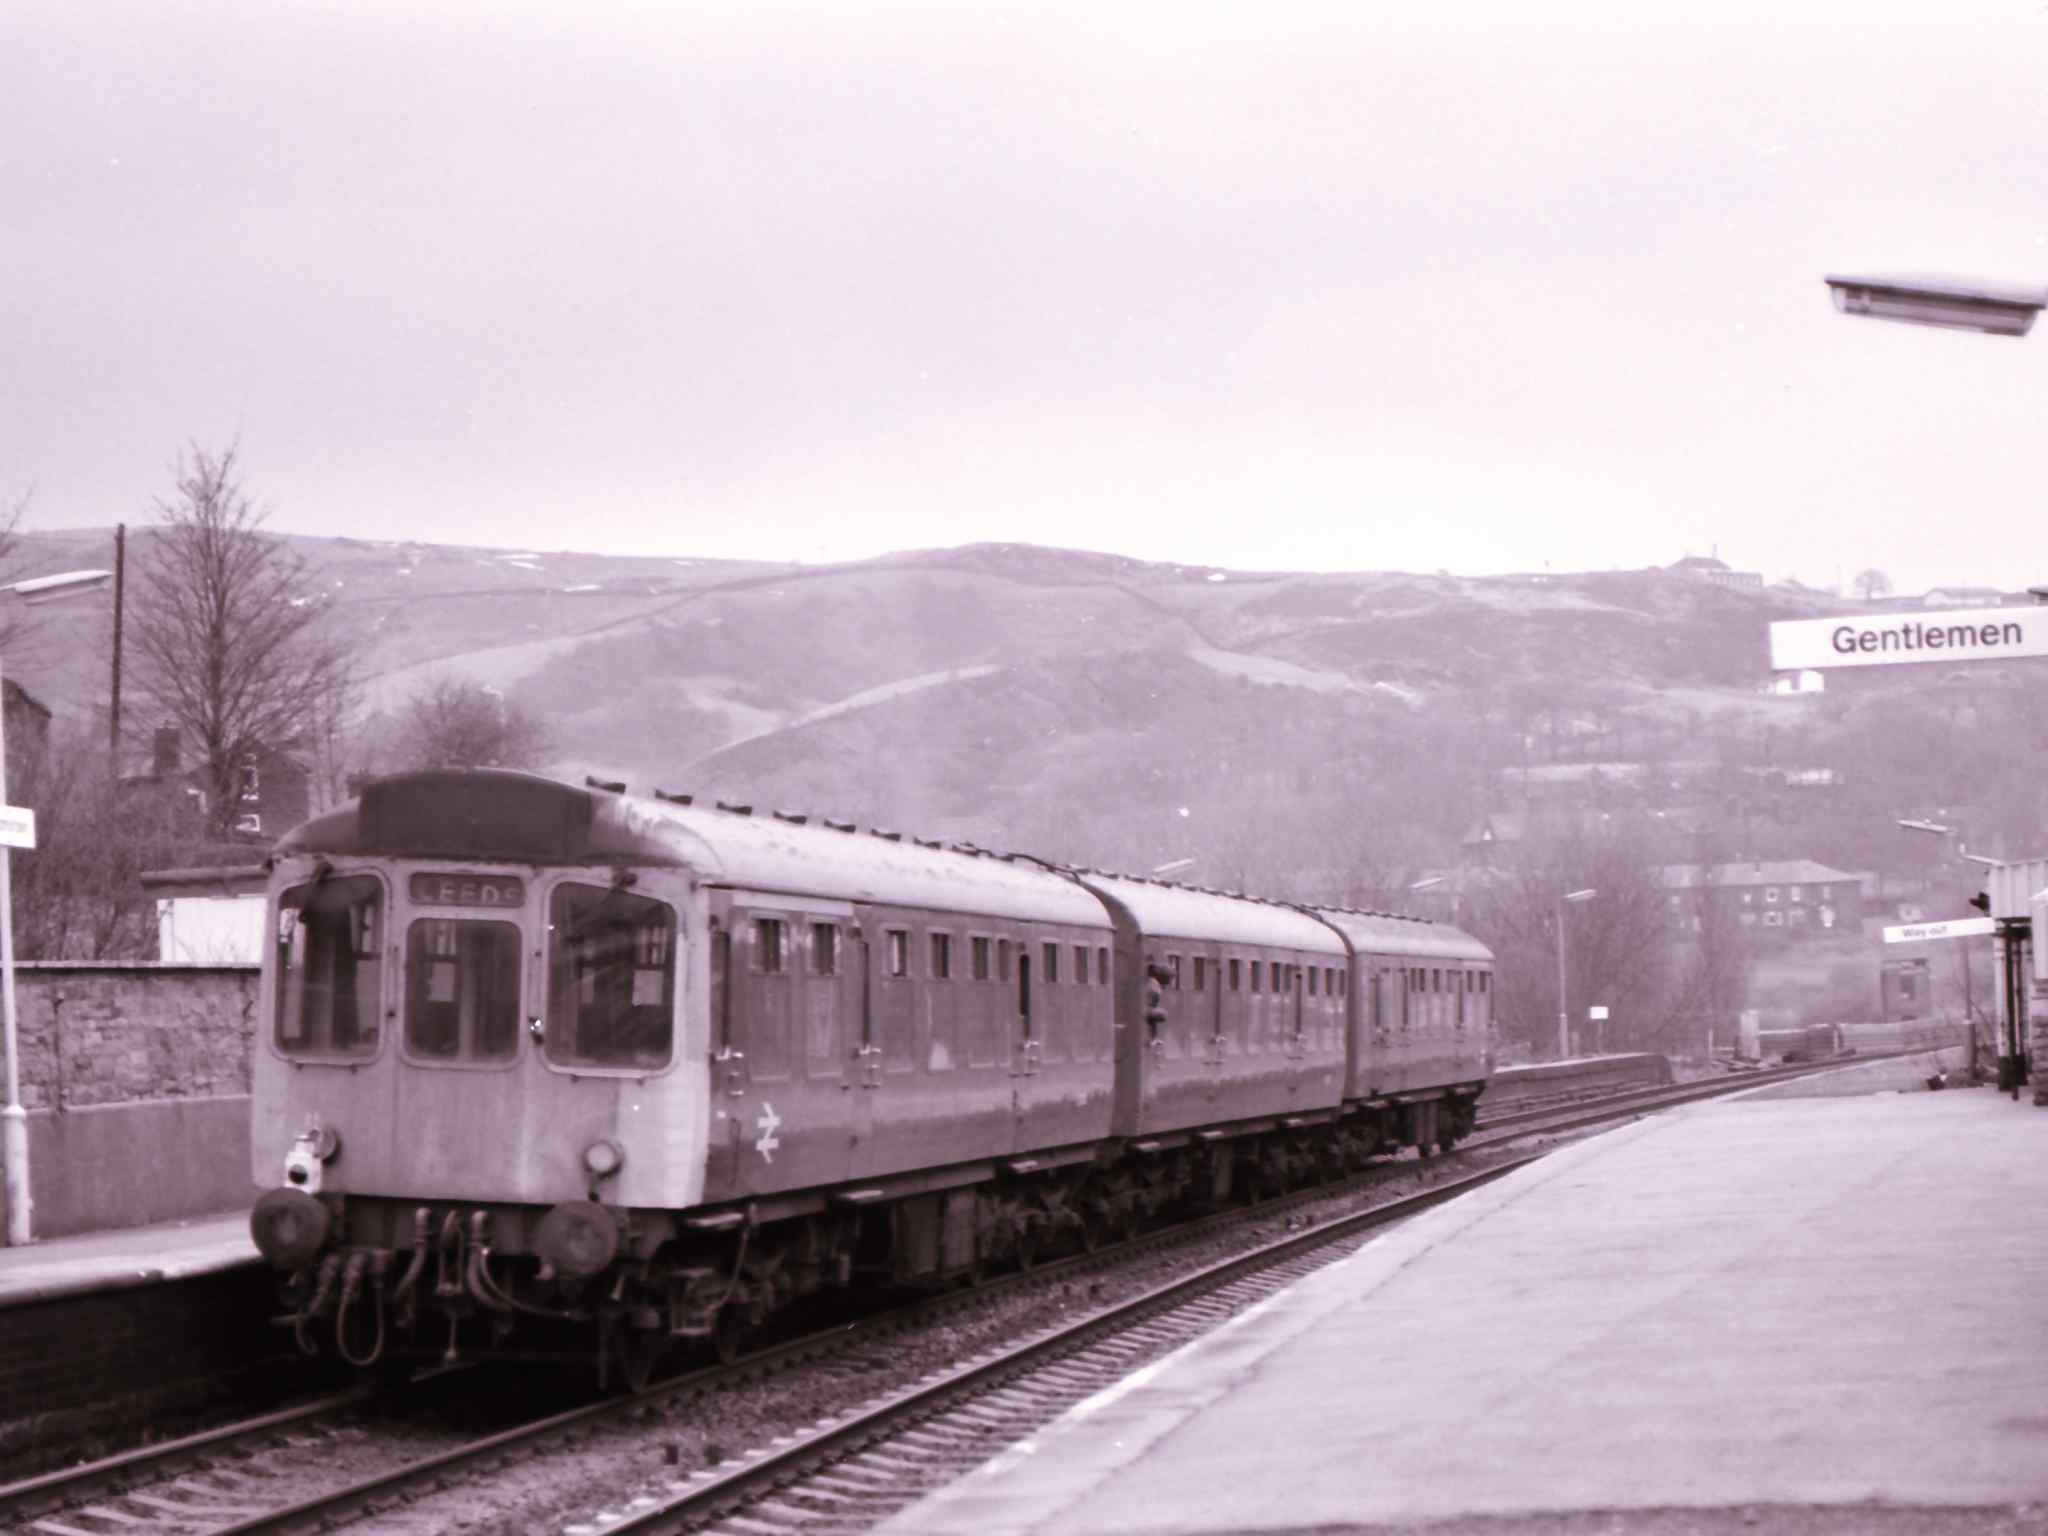 Class 110 Calder Valley unit departs from Todmorden towards Leeds on the down Manchester. The unit is in BR corporate blue and still has three cards, although the headcoe box has been painted over.